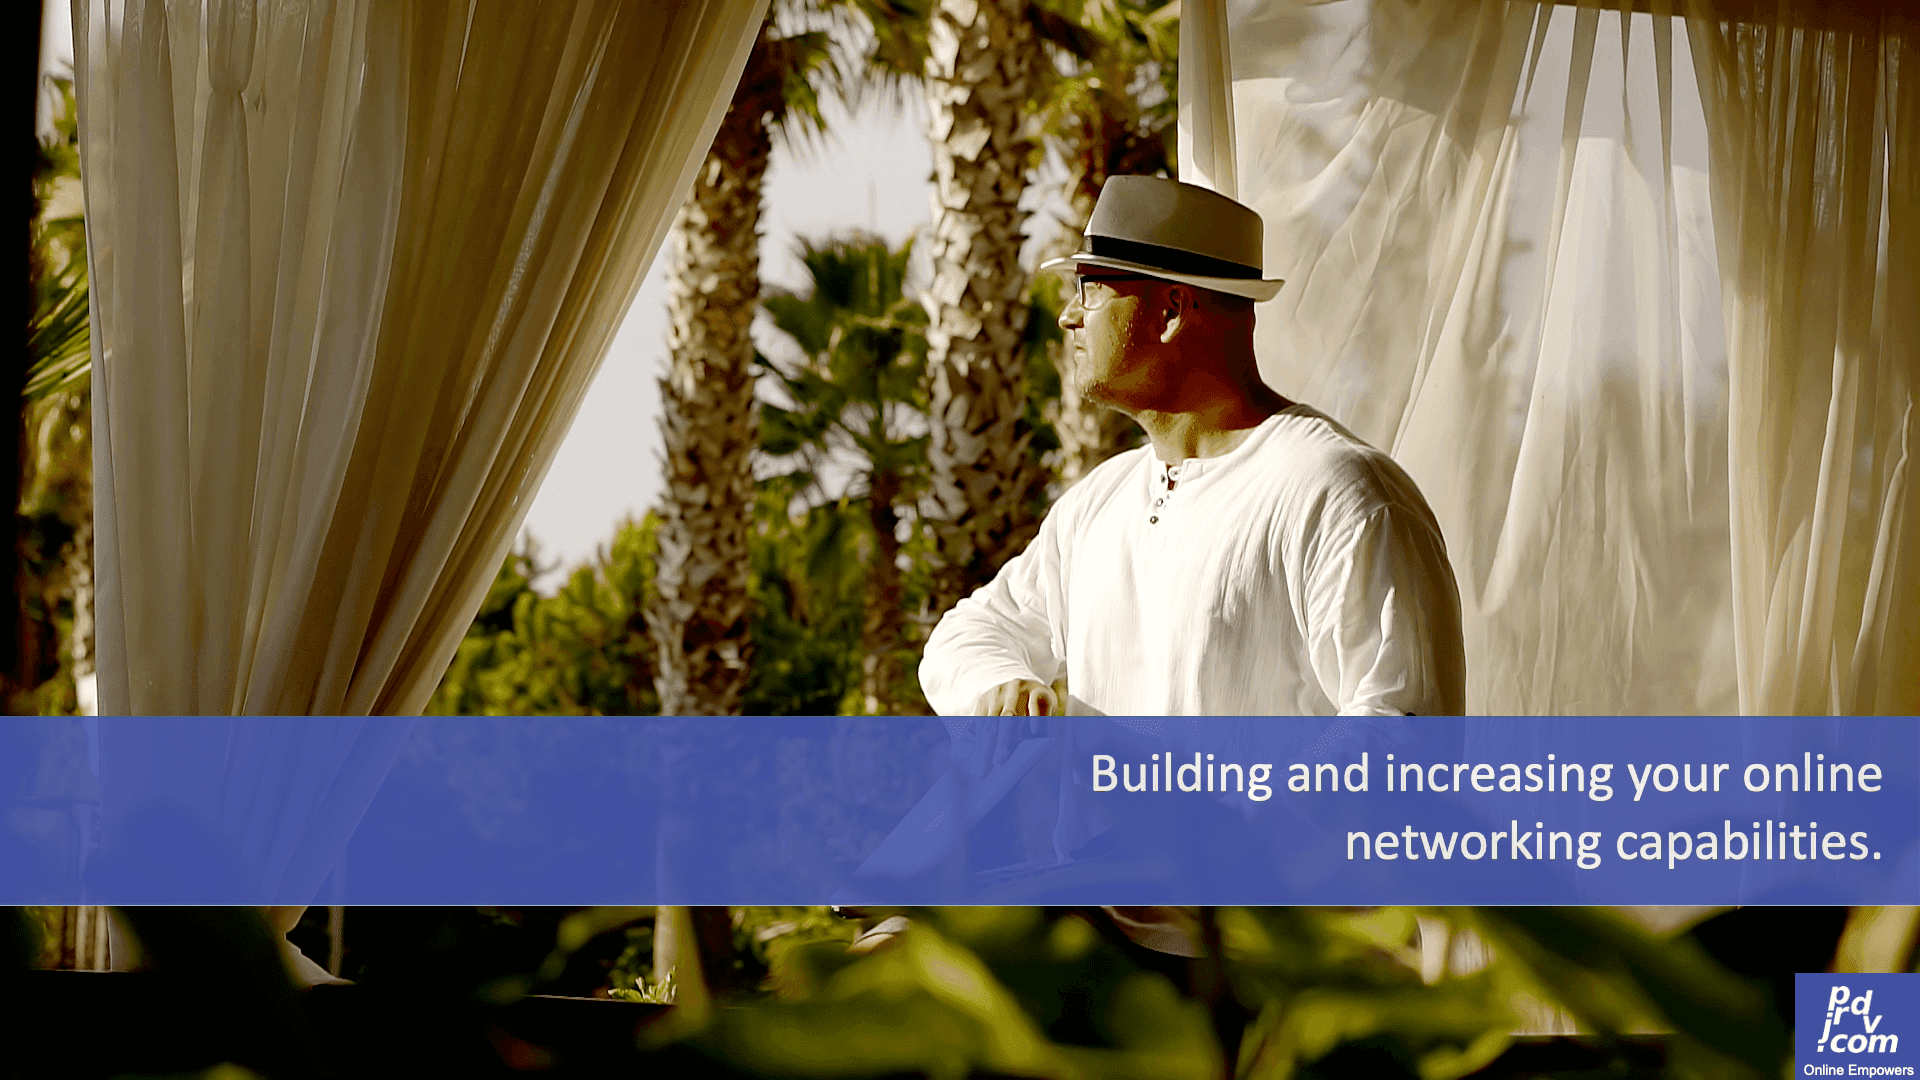 Building and increasing your online networking capabilities.